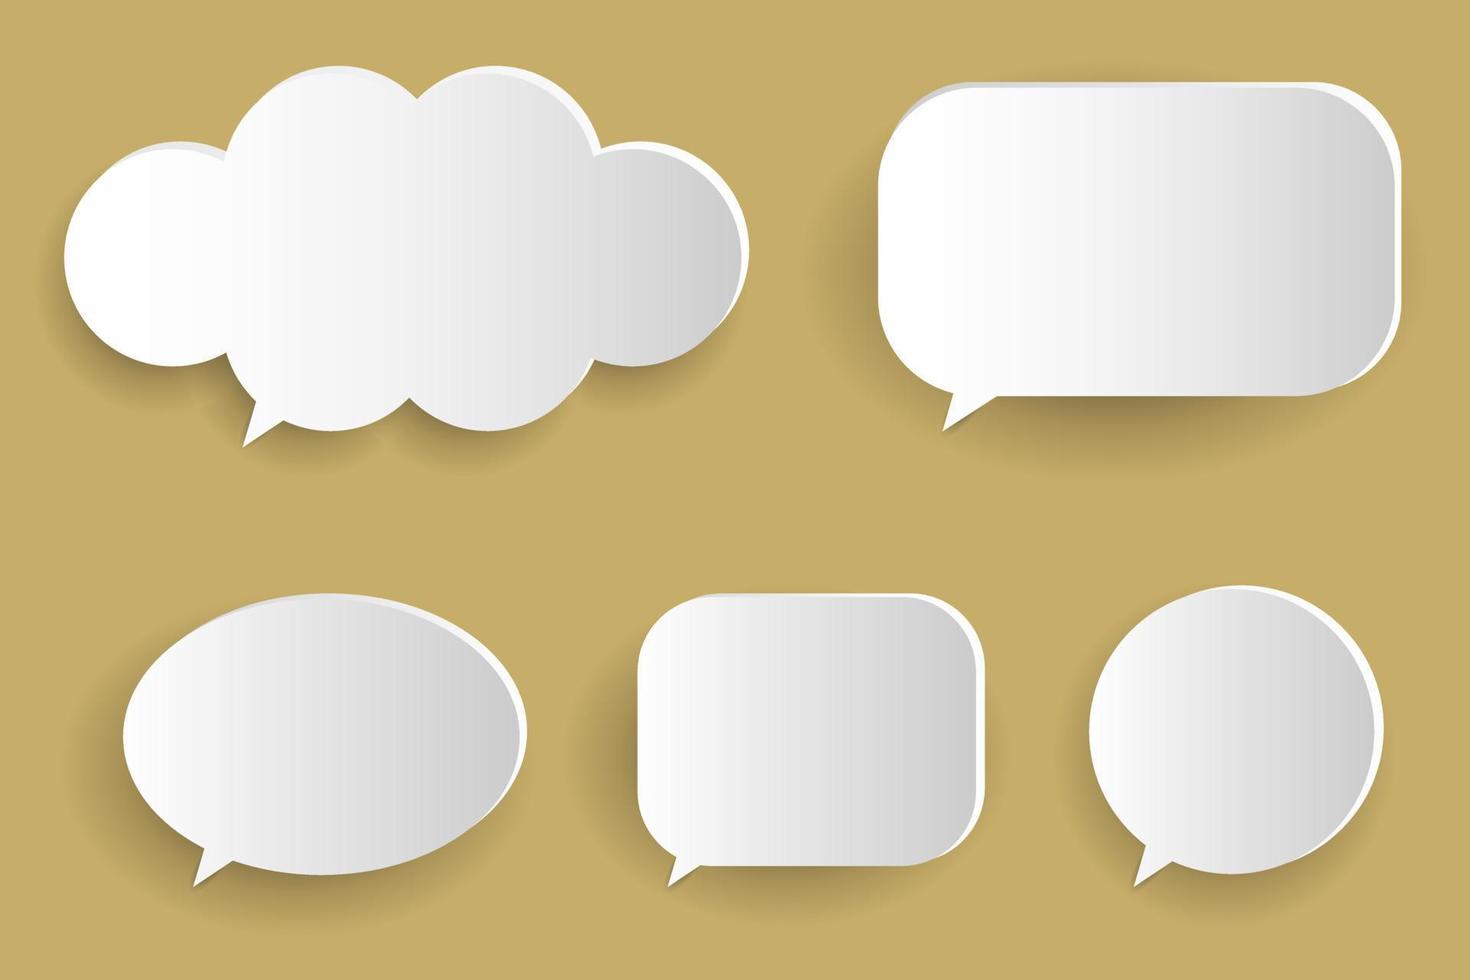 blank 3d speech bubbles, icon set poster and banner concept on soft mustard background. vector